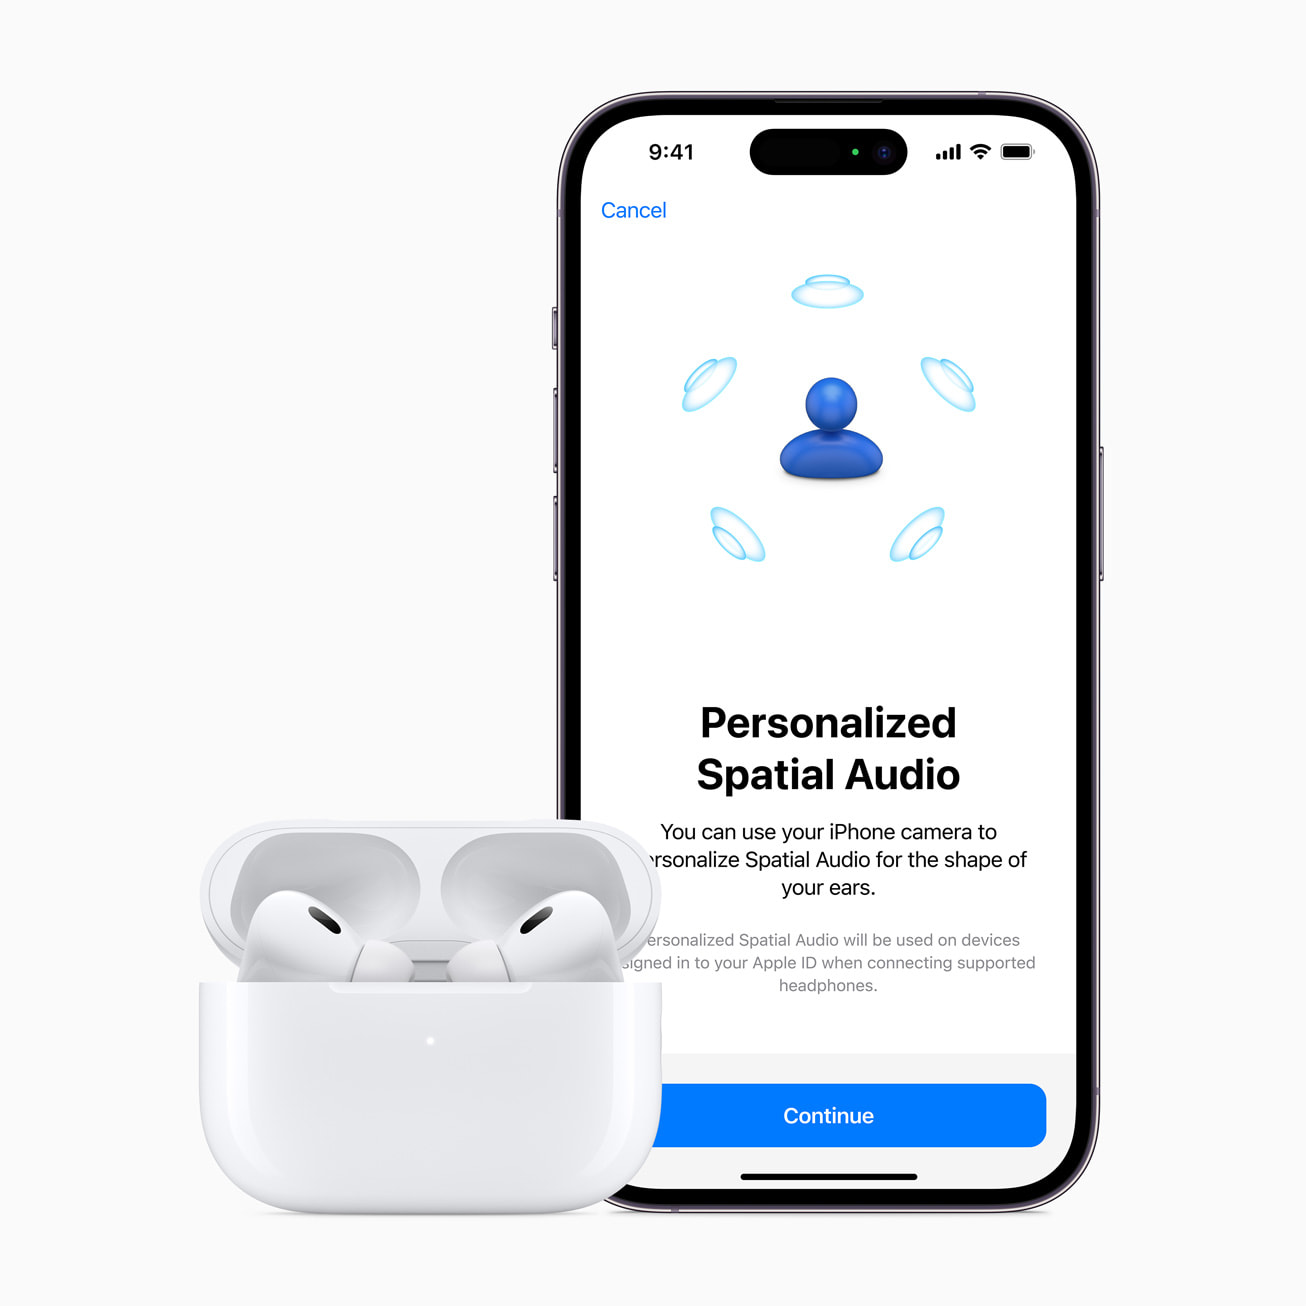 The AirPods listening experience is even more immersive with Personalized Spatial Audio.